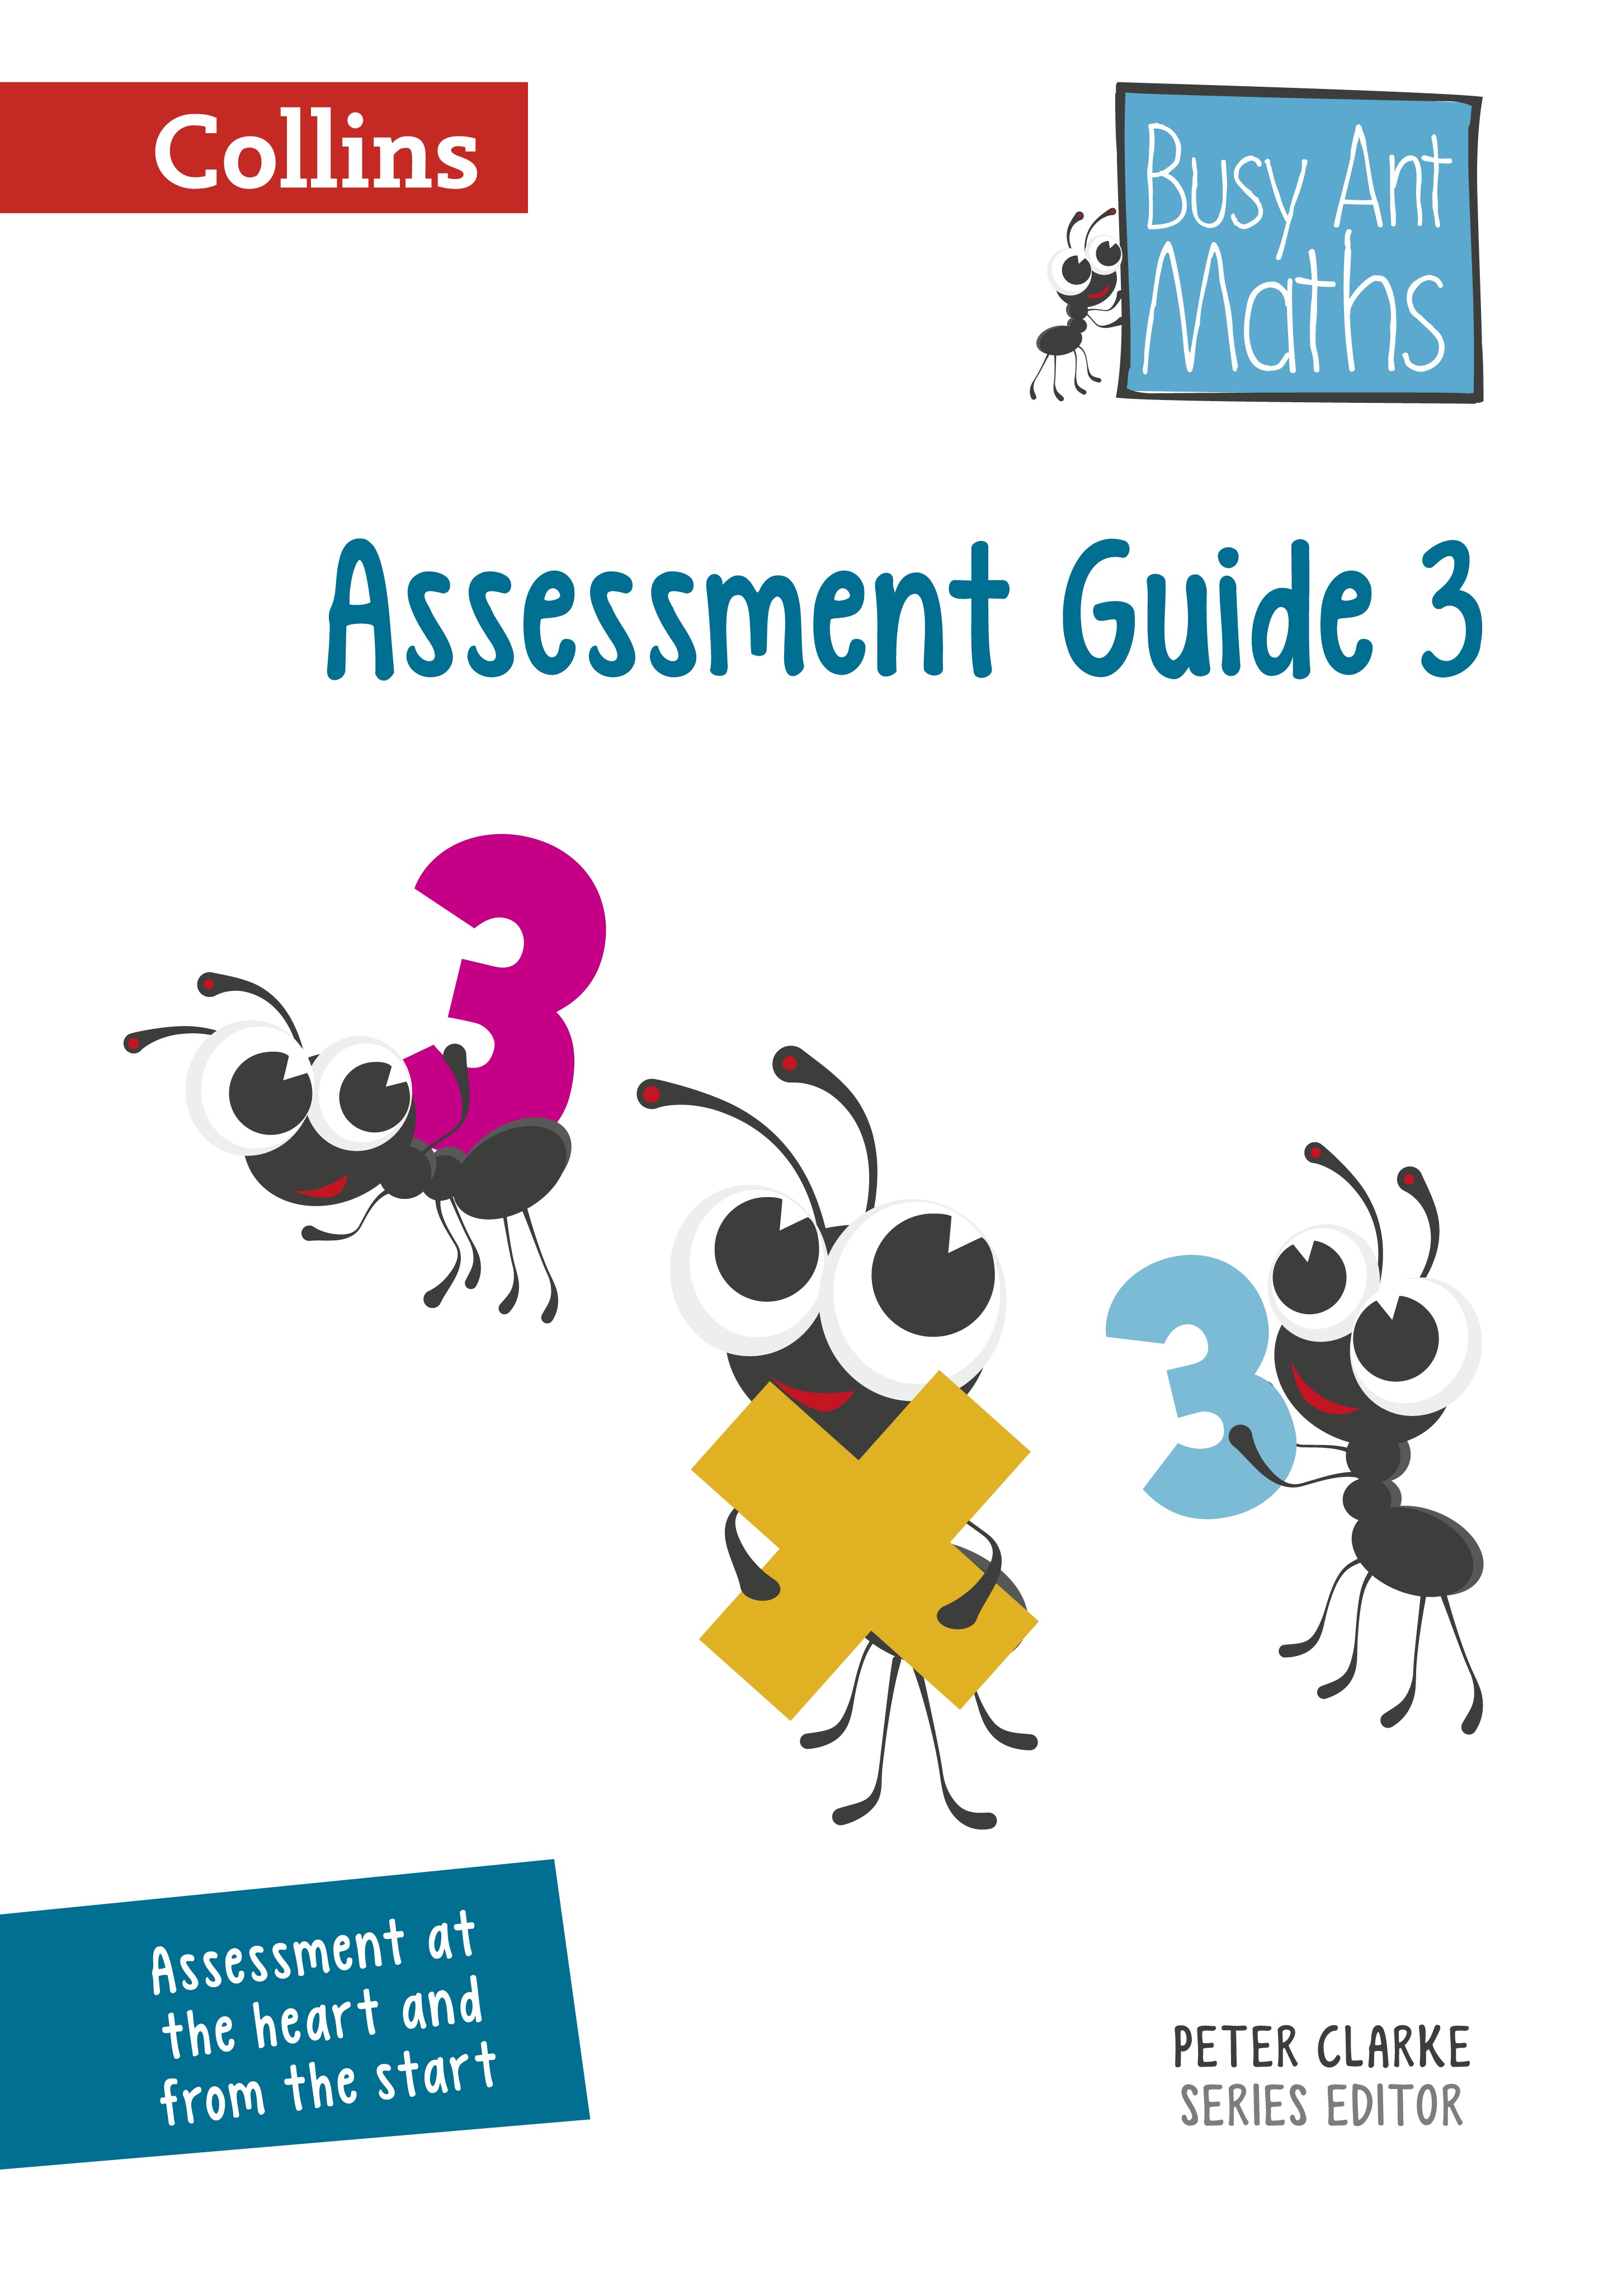 busy-ant-maths-assessment-guide-3